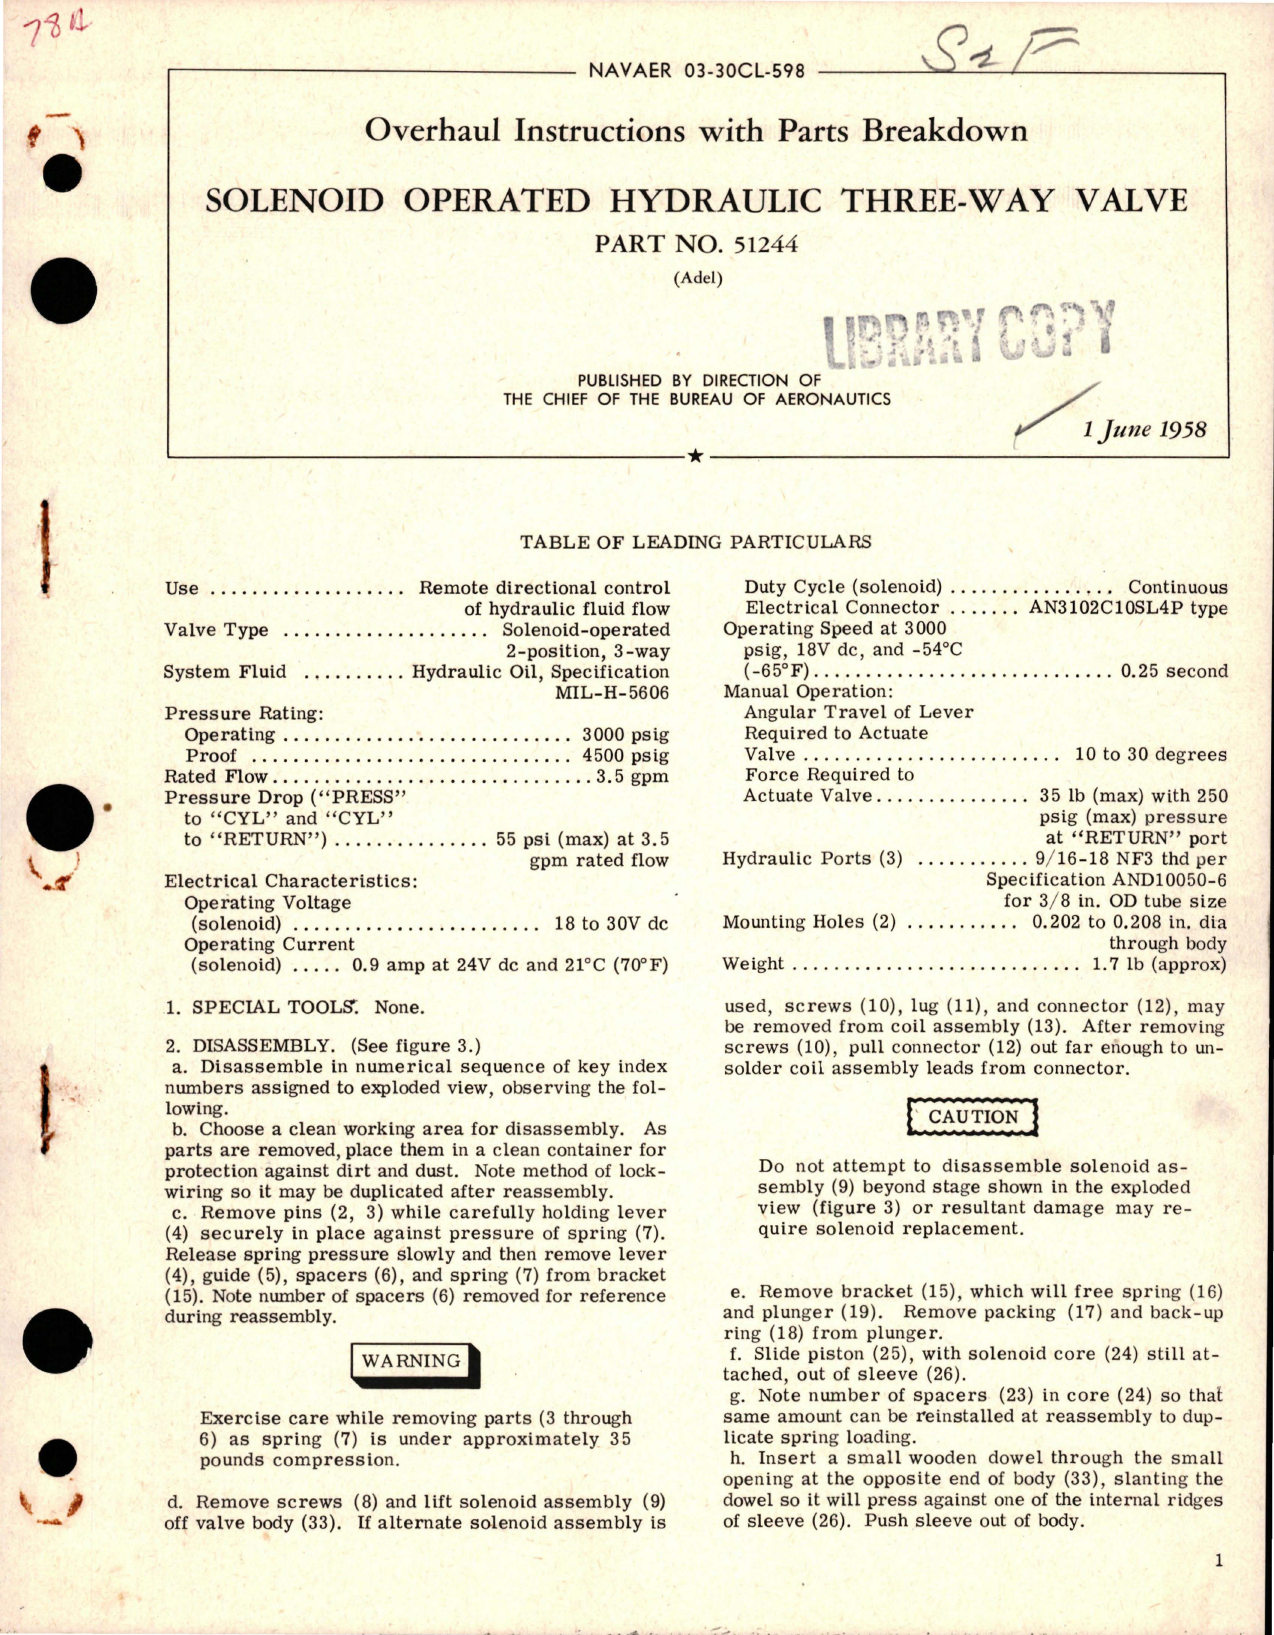 Sample page 1 from AirCorps Library document: Overhaul Instructions with Parts for Solenoid Operated Hydraulic Three-Way Valve - Part 51244 